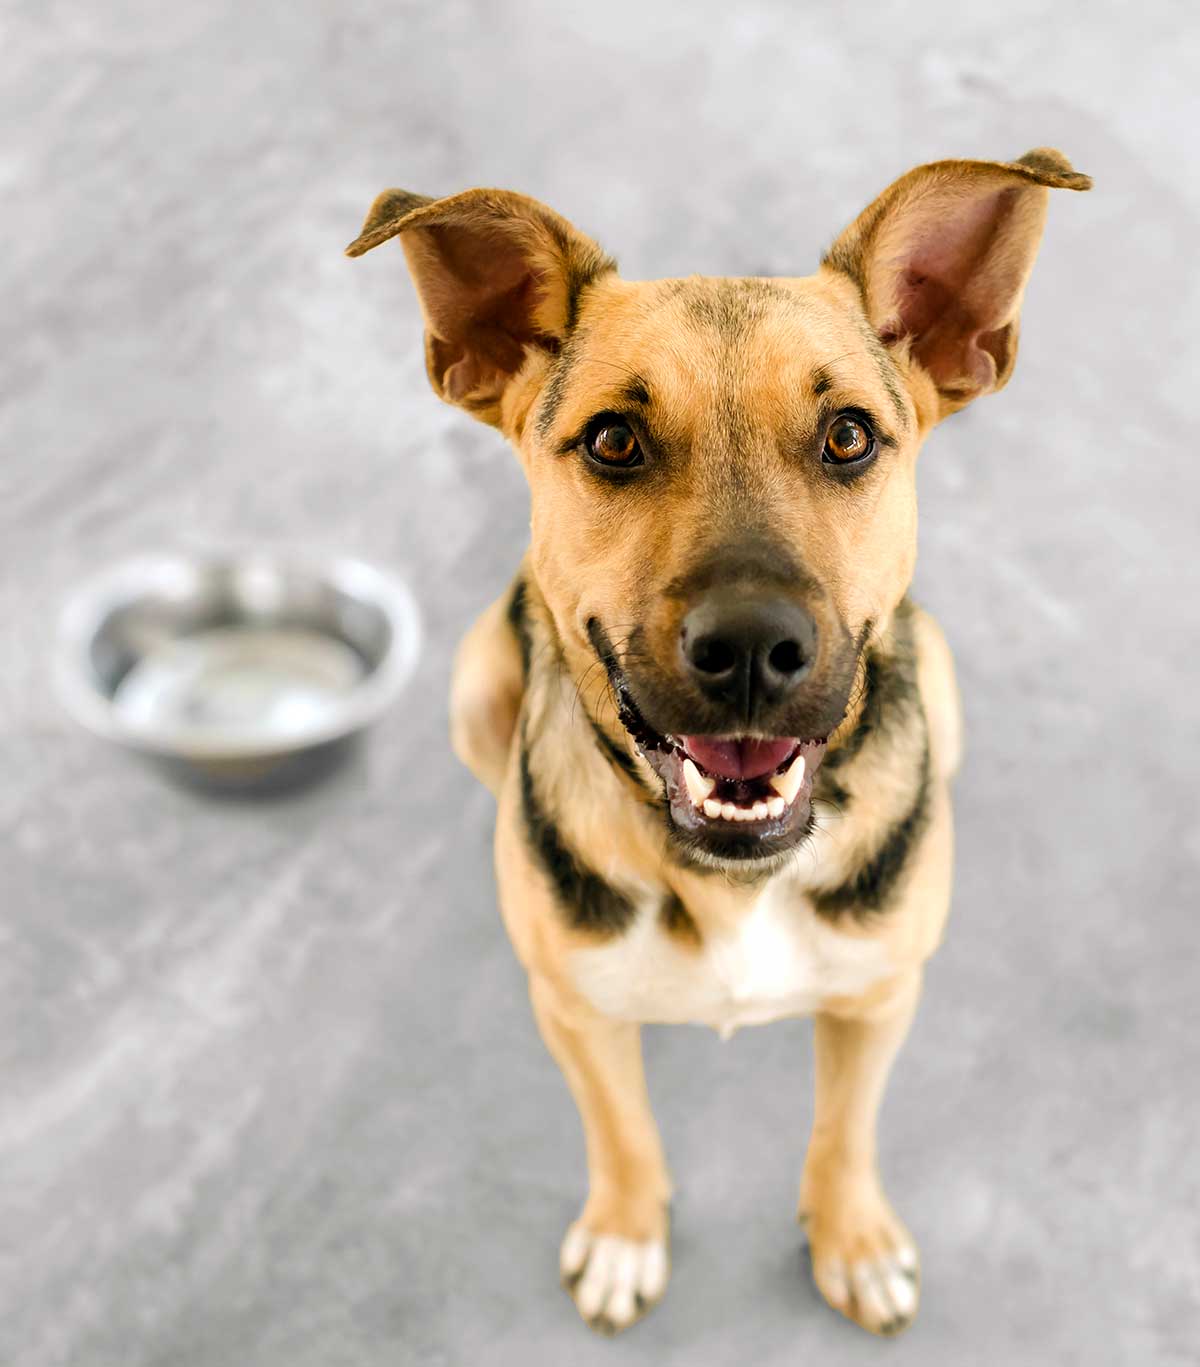 A young dog staring at the camera, a bowl of water nearby